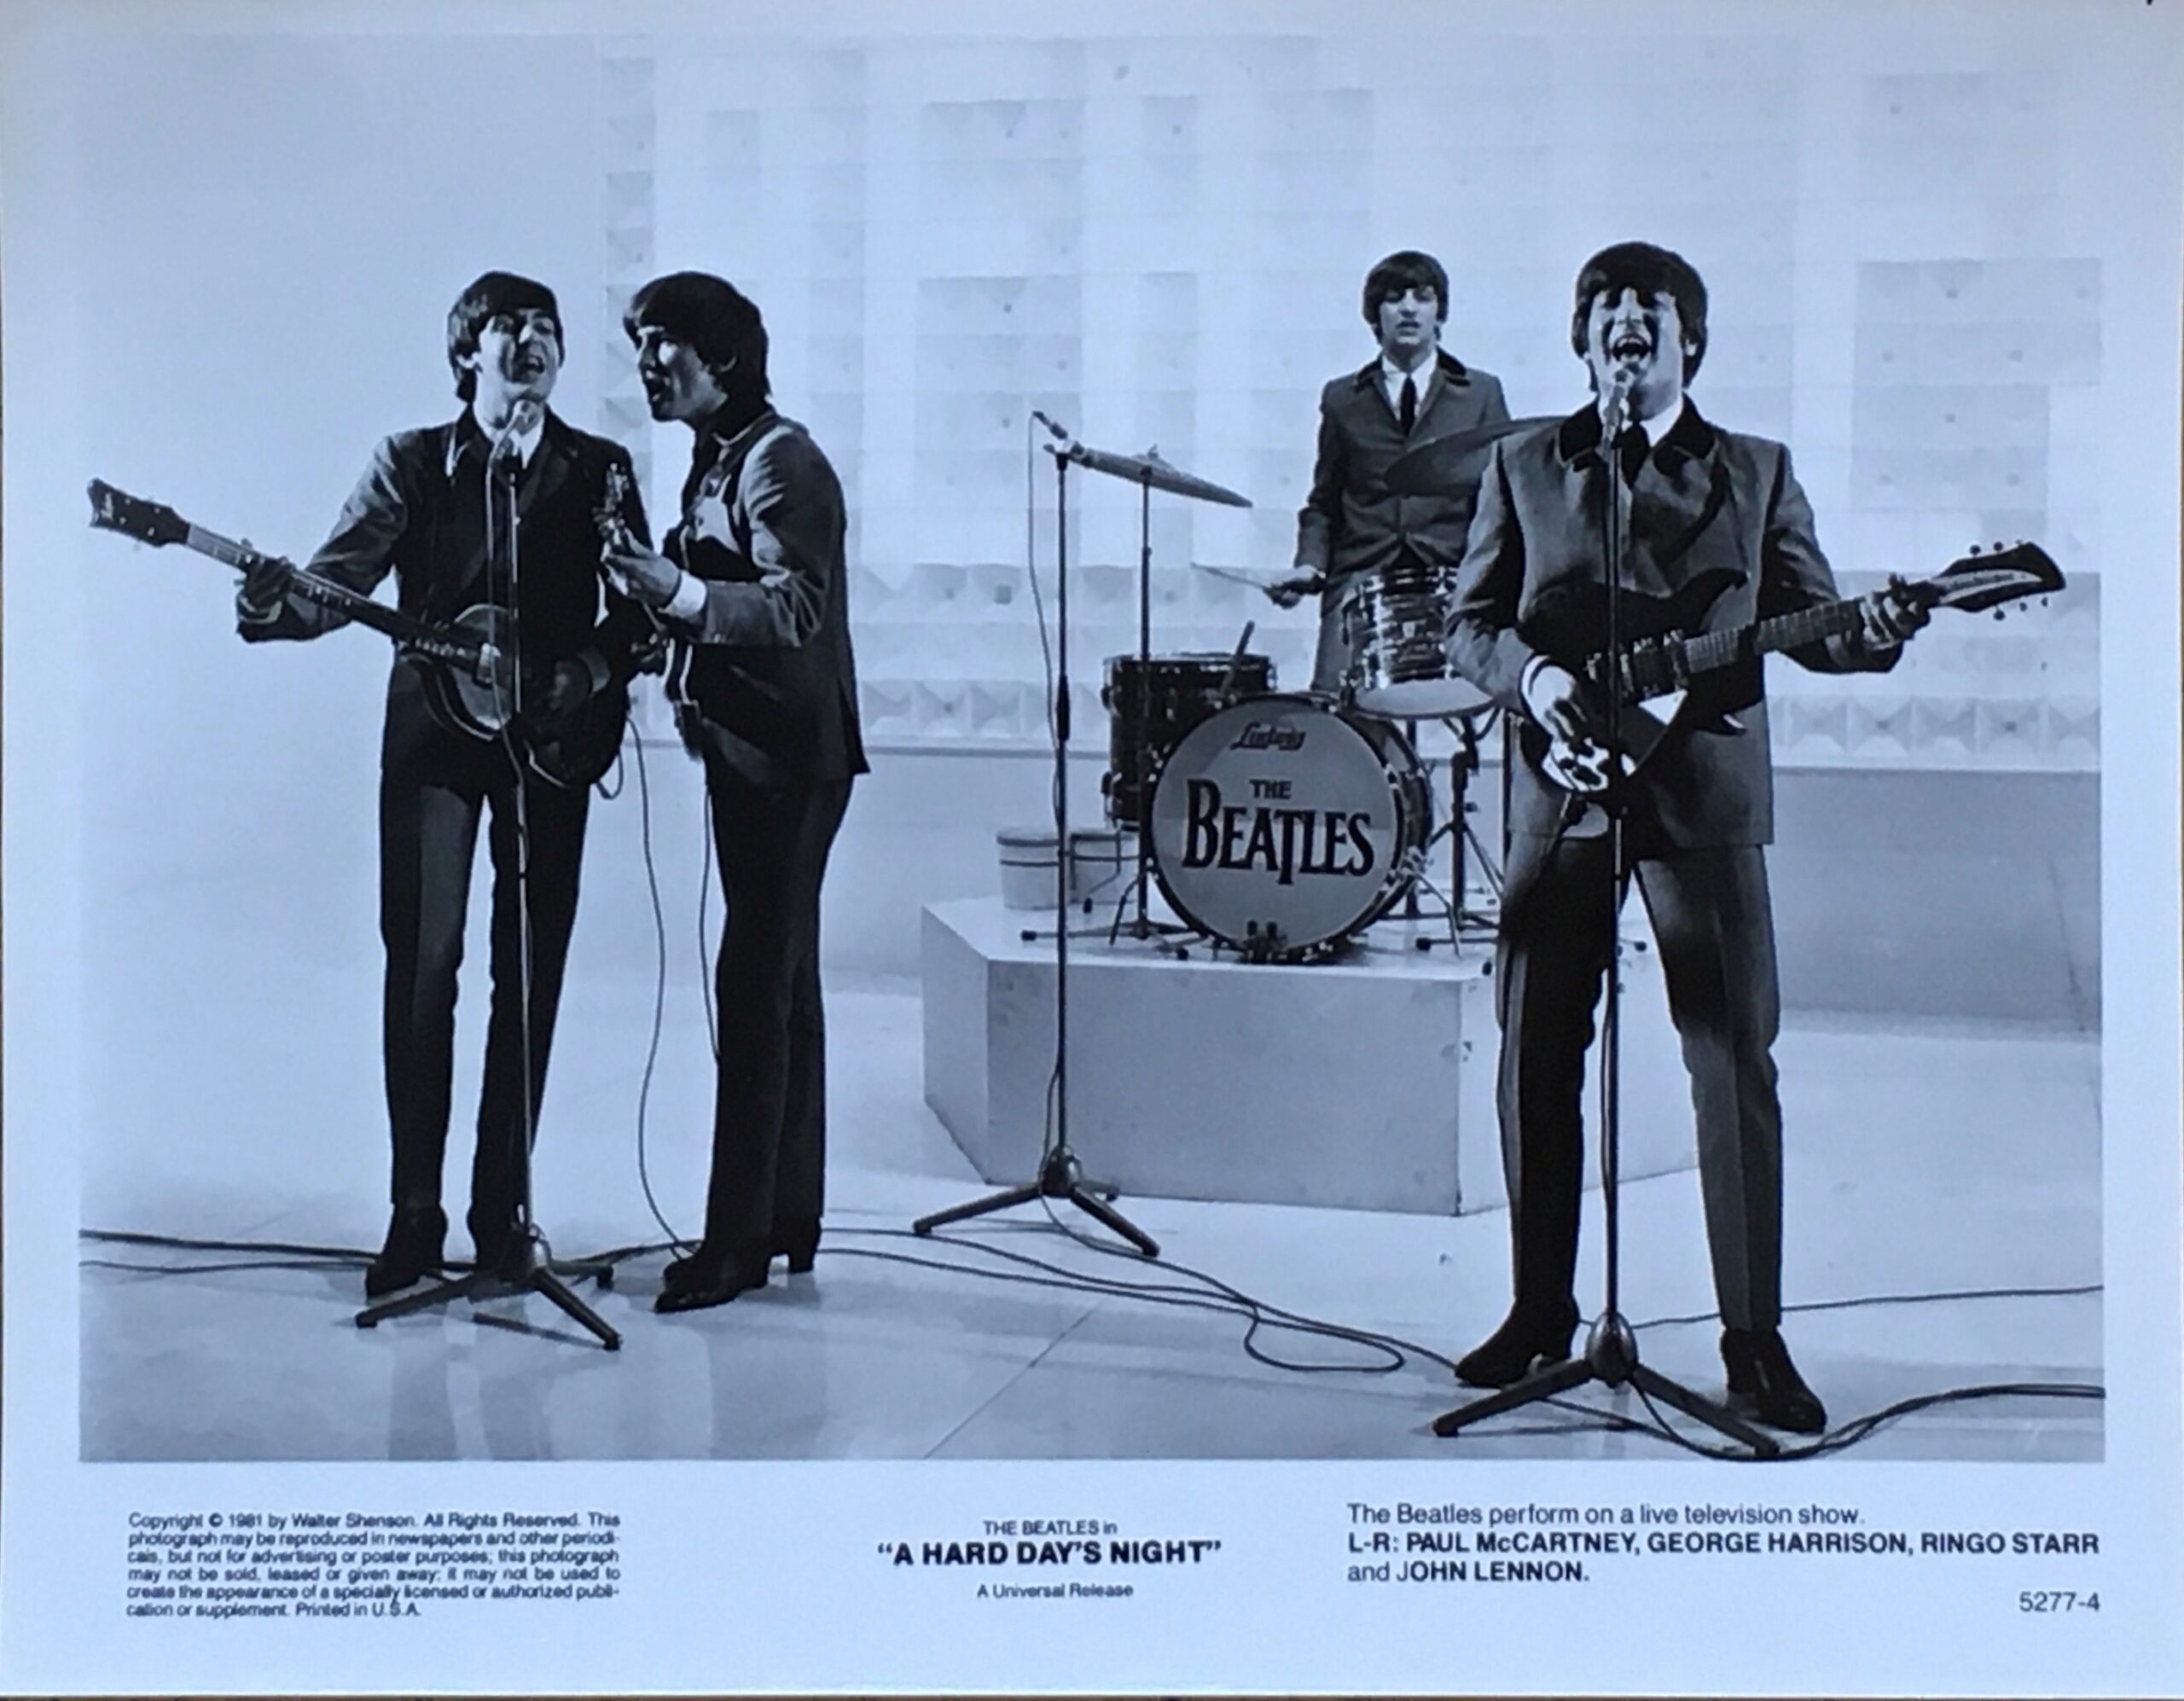 Original vintage cinema still for the 1982 re=release of A Hard Day's Night, starring the Beatles